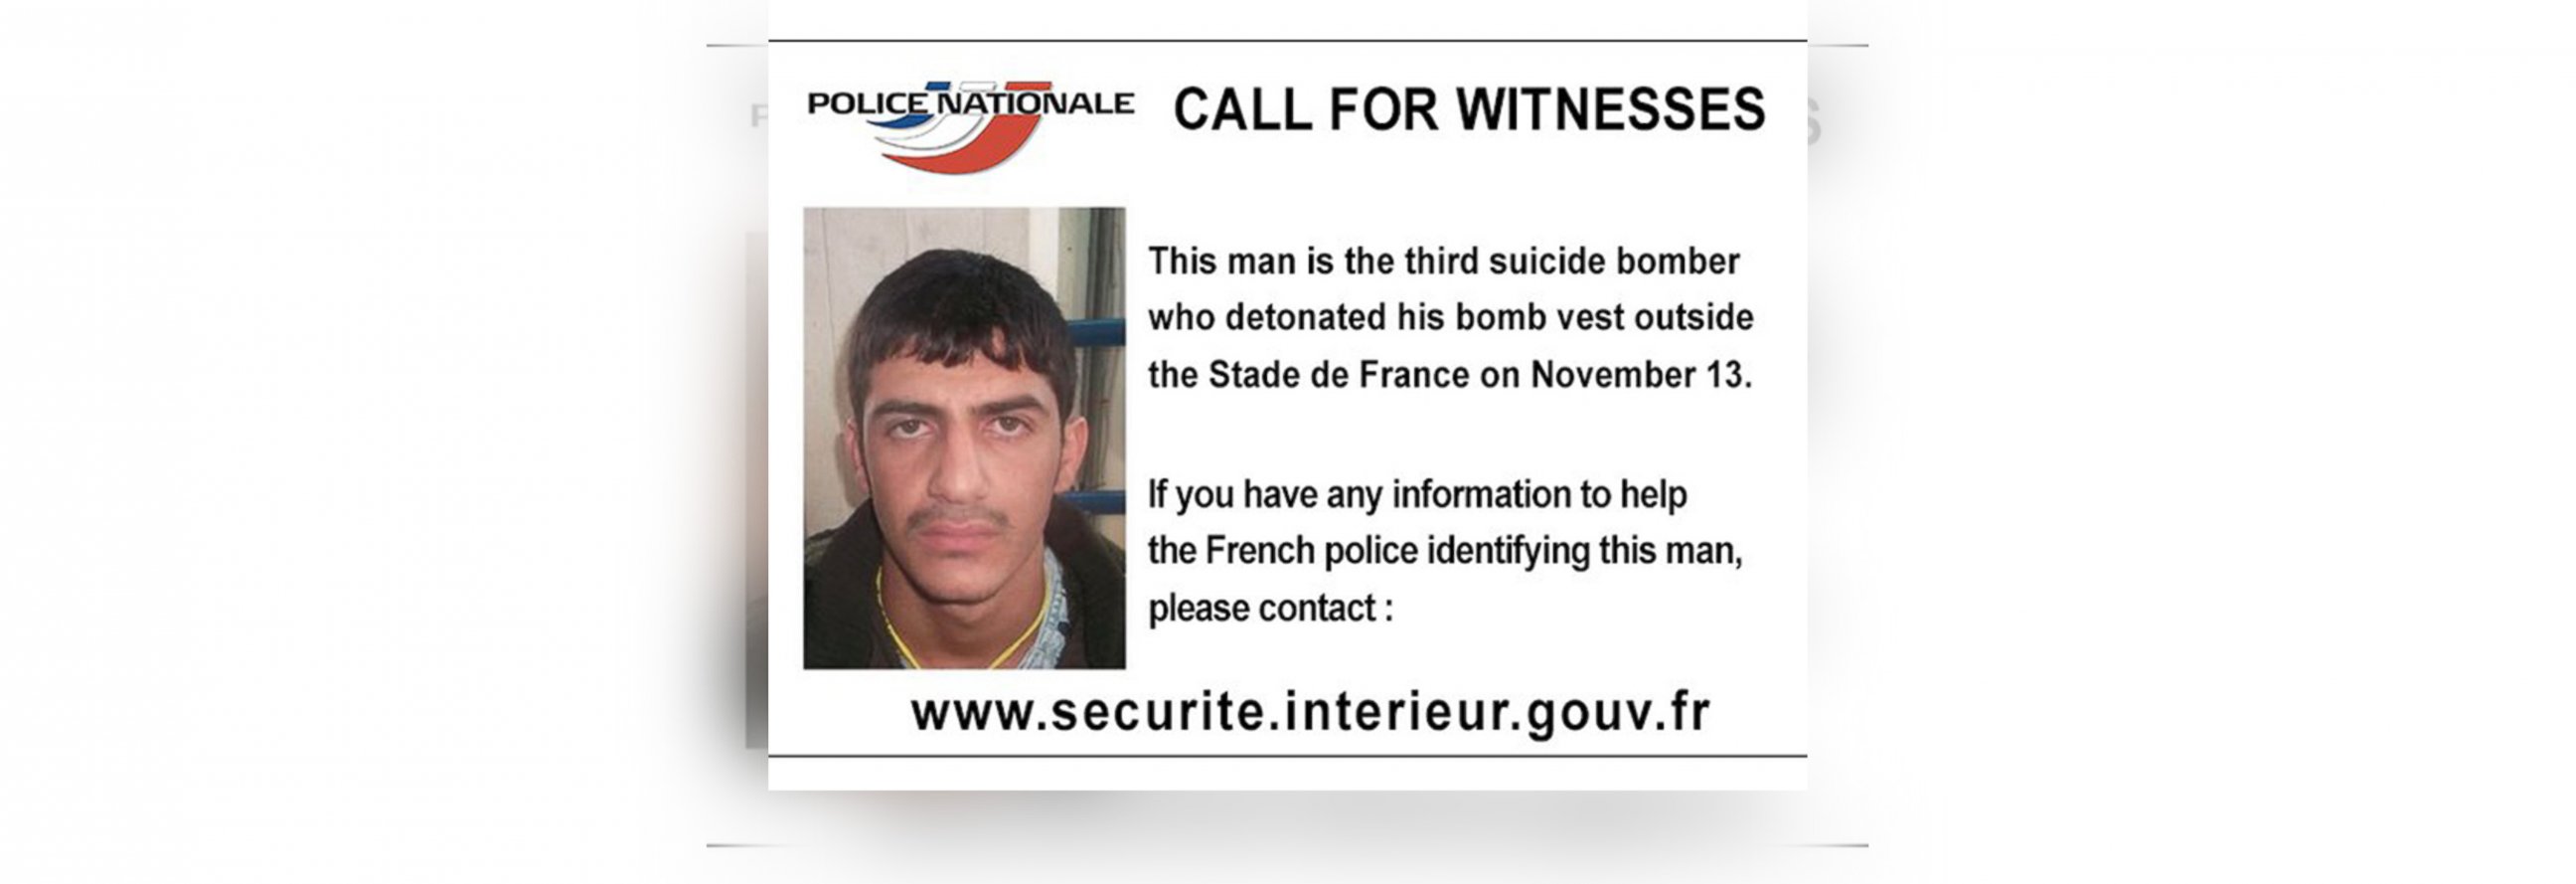 PHOTO: French police released this call for information, writing, "This man is the third suicide bomber who detonated his bomb vest outside the Stade de France on November 13."